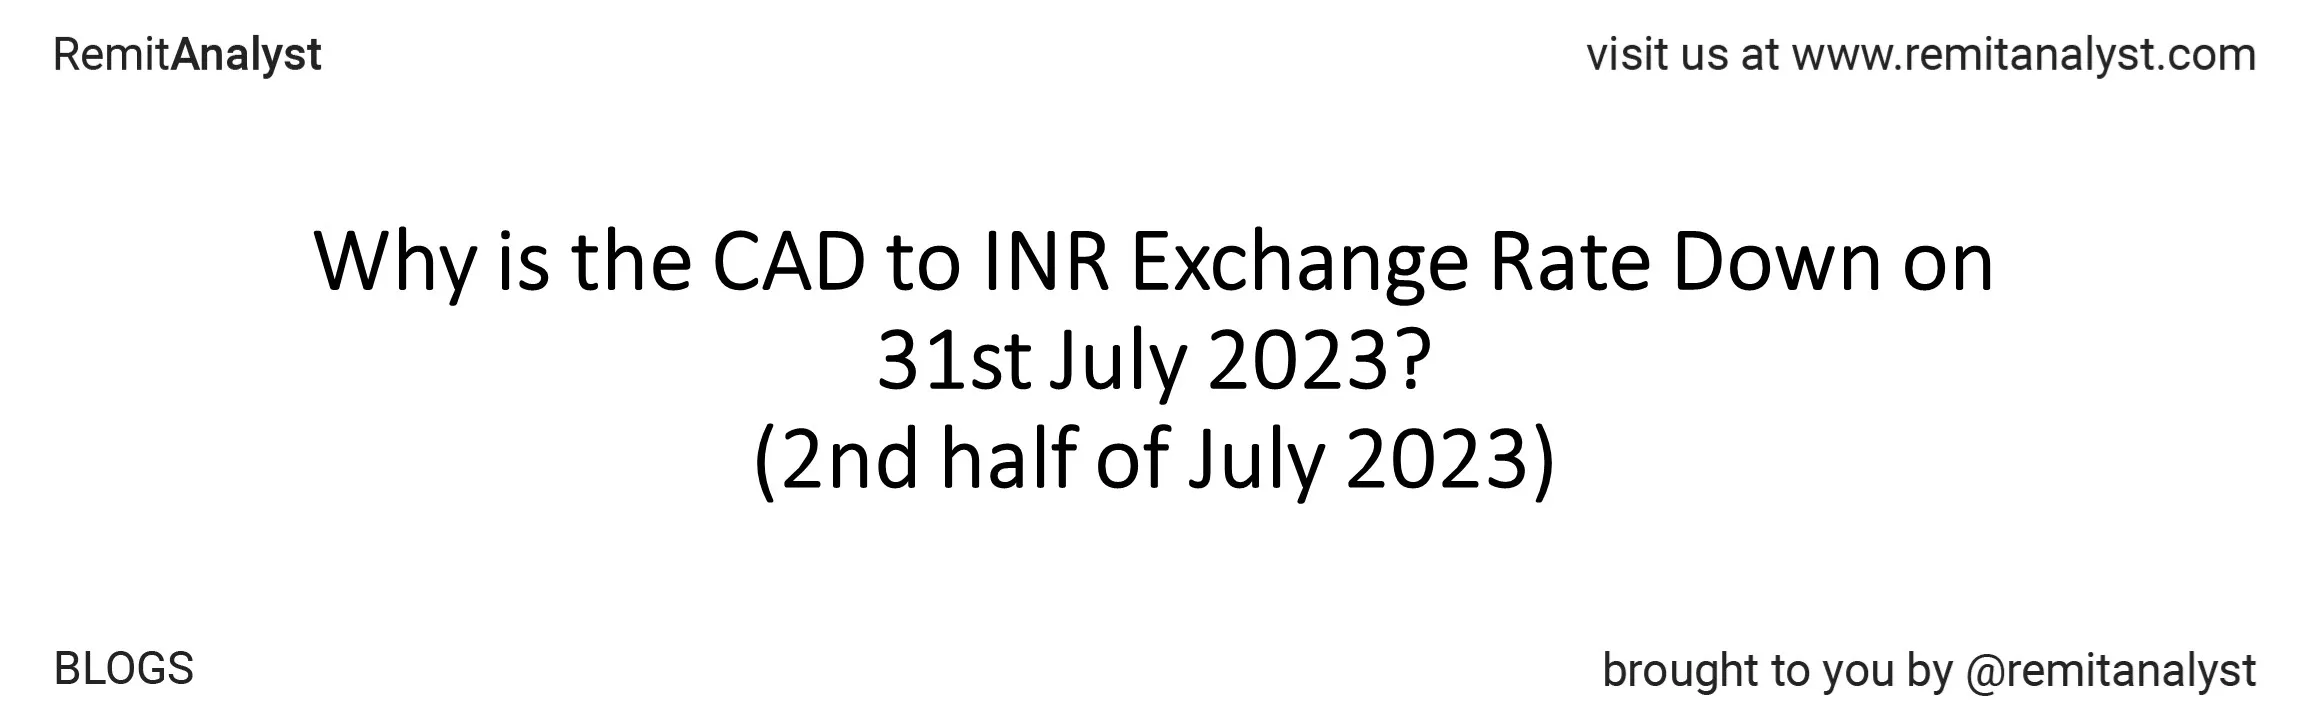 cad-to-inr-exchange-rate-from-17-july-2023-to-31-july-2023-title